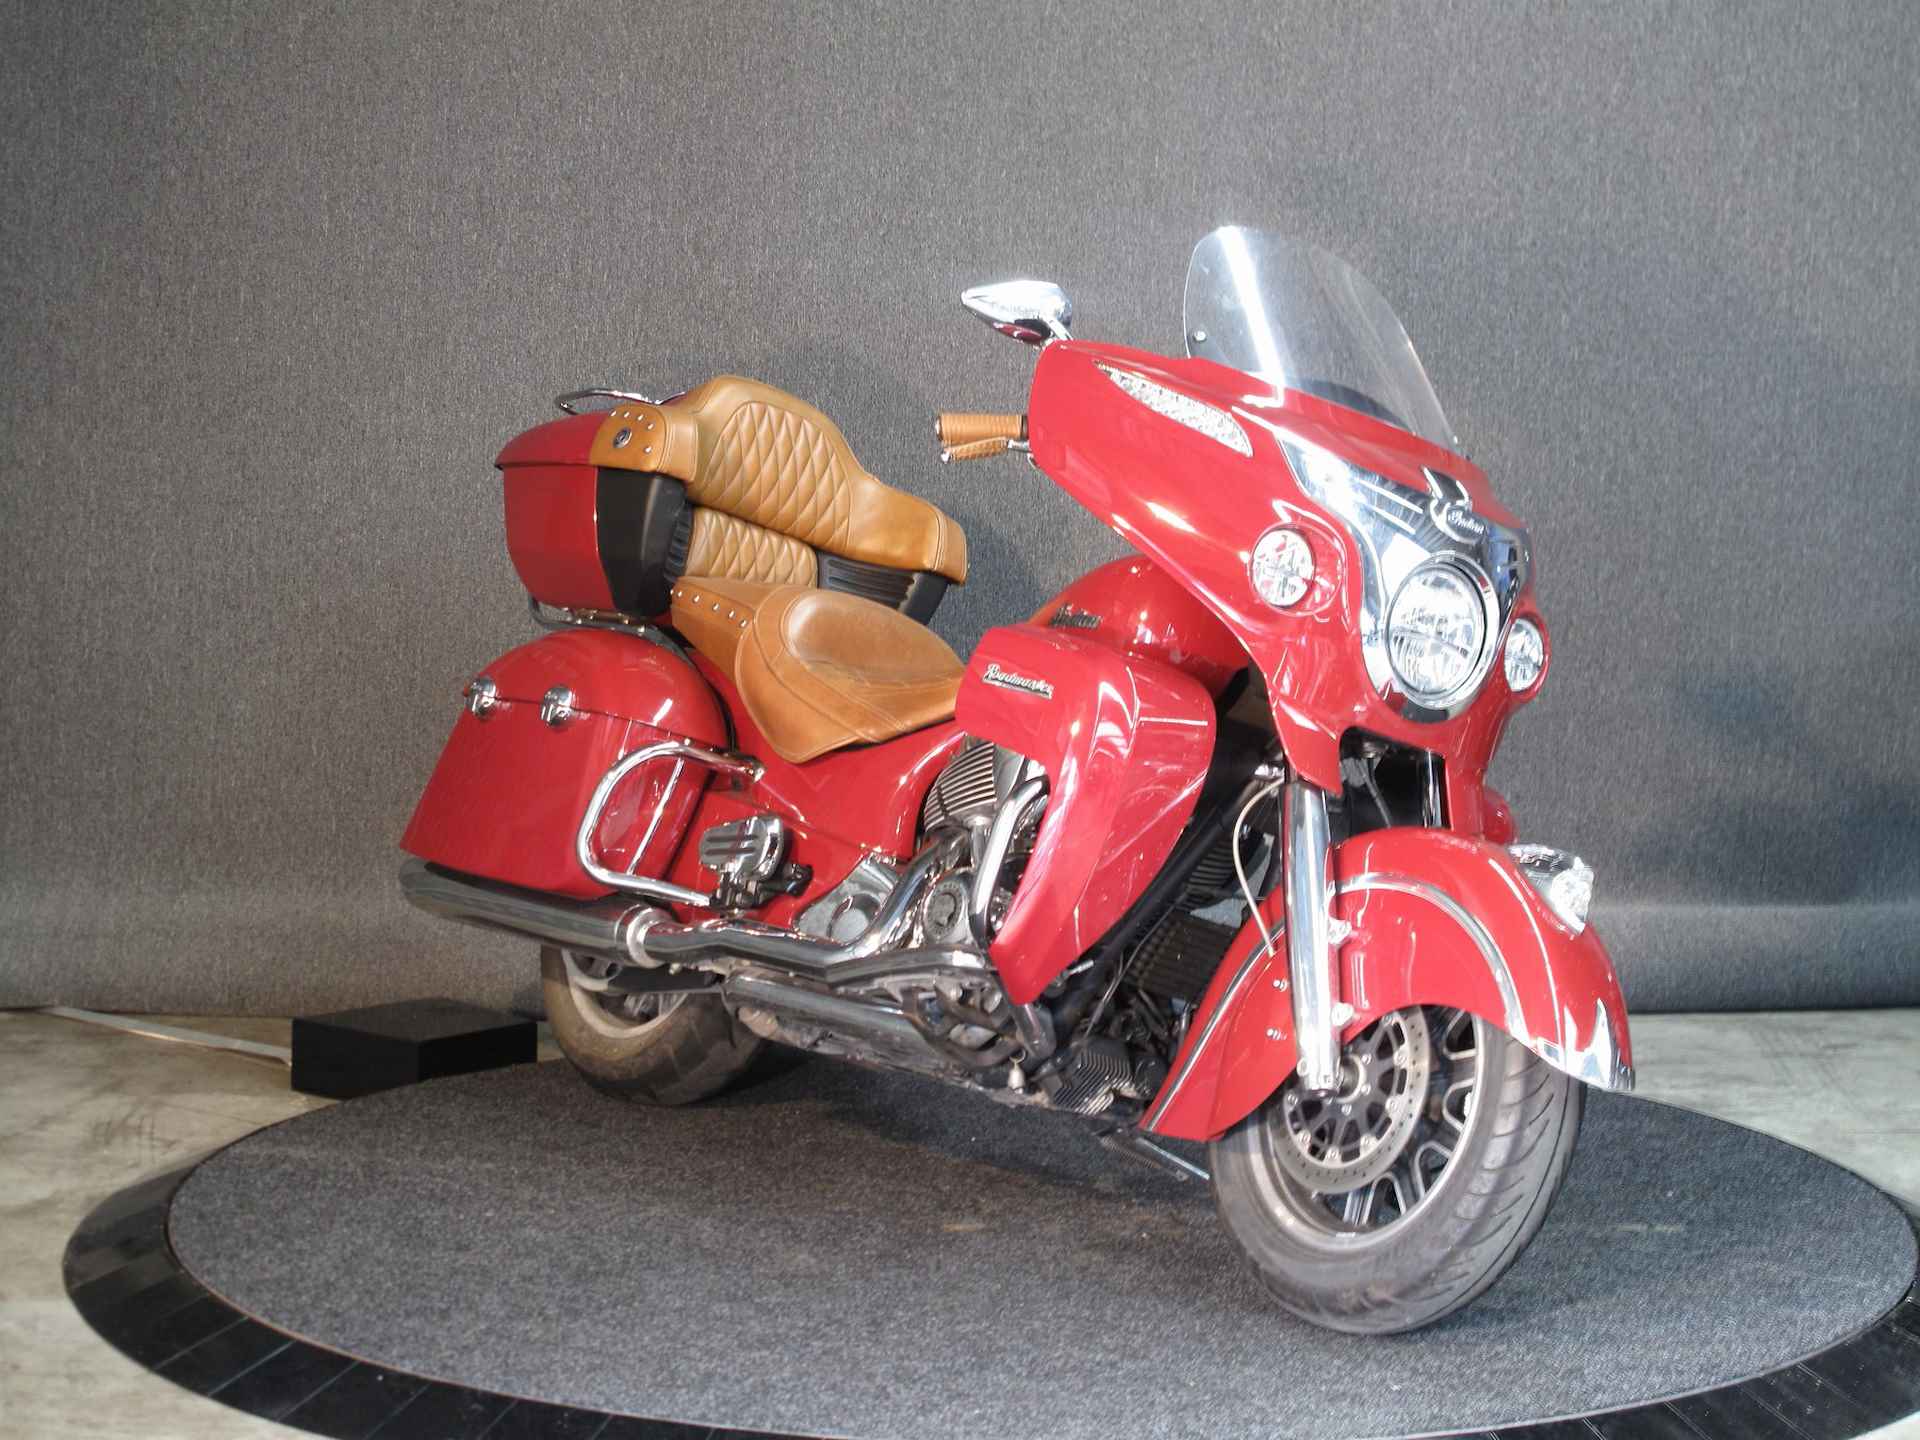 Indian Roadmaster The official Indian Motorcycle Dealer - 8/13